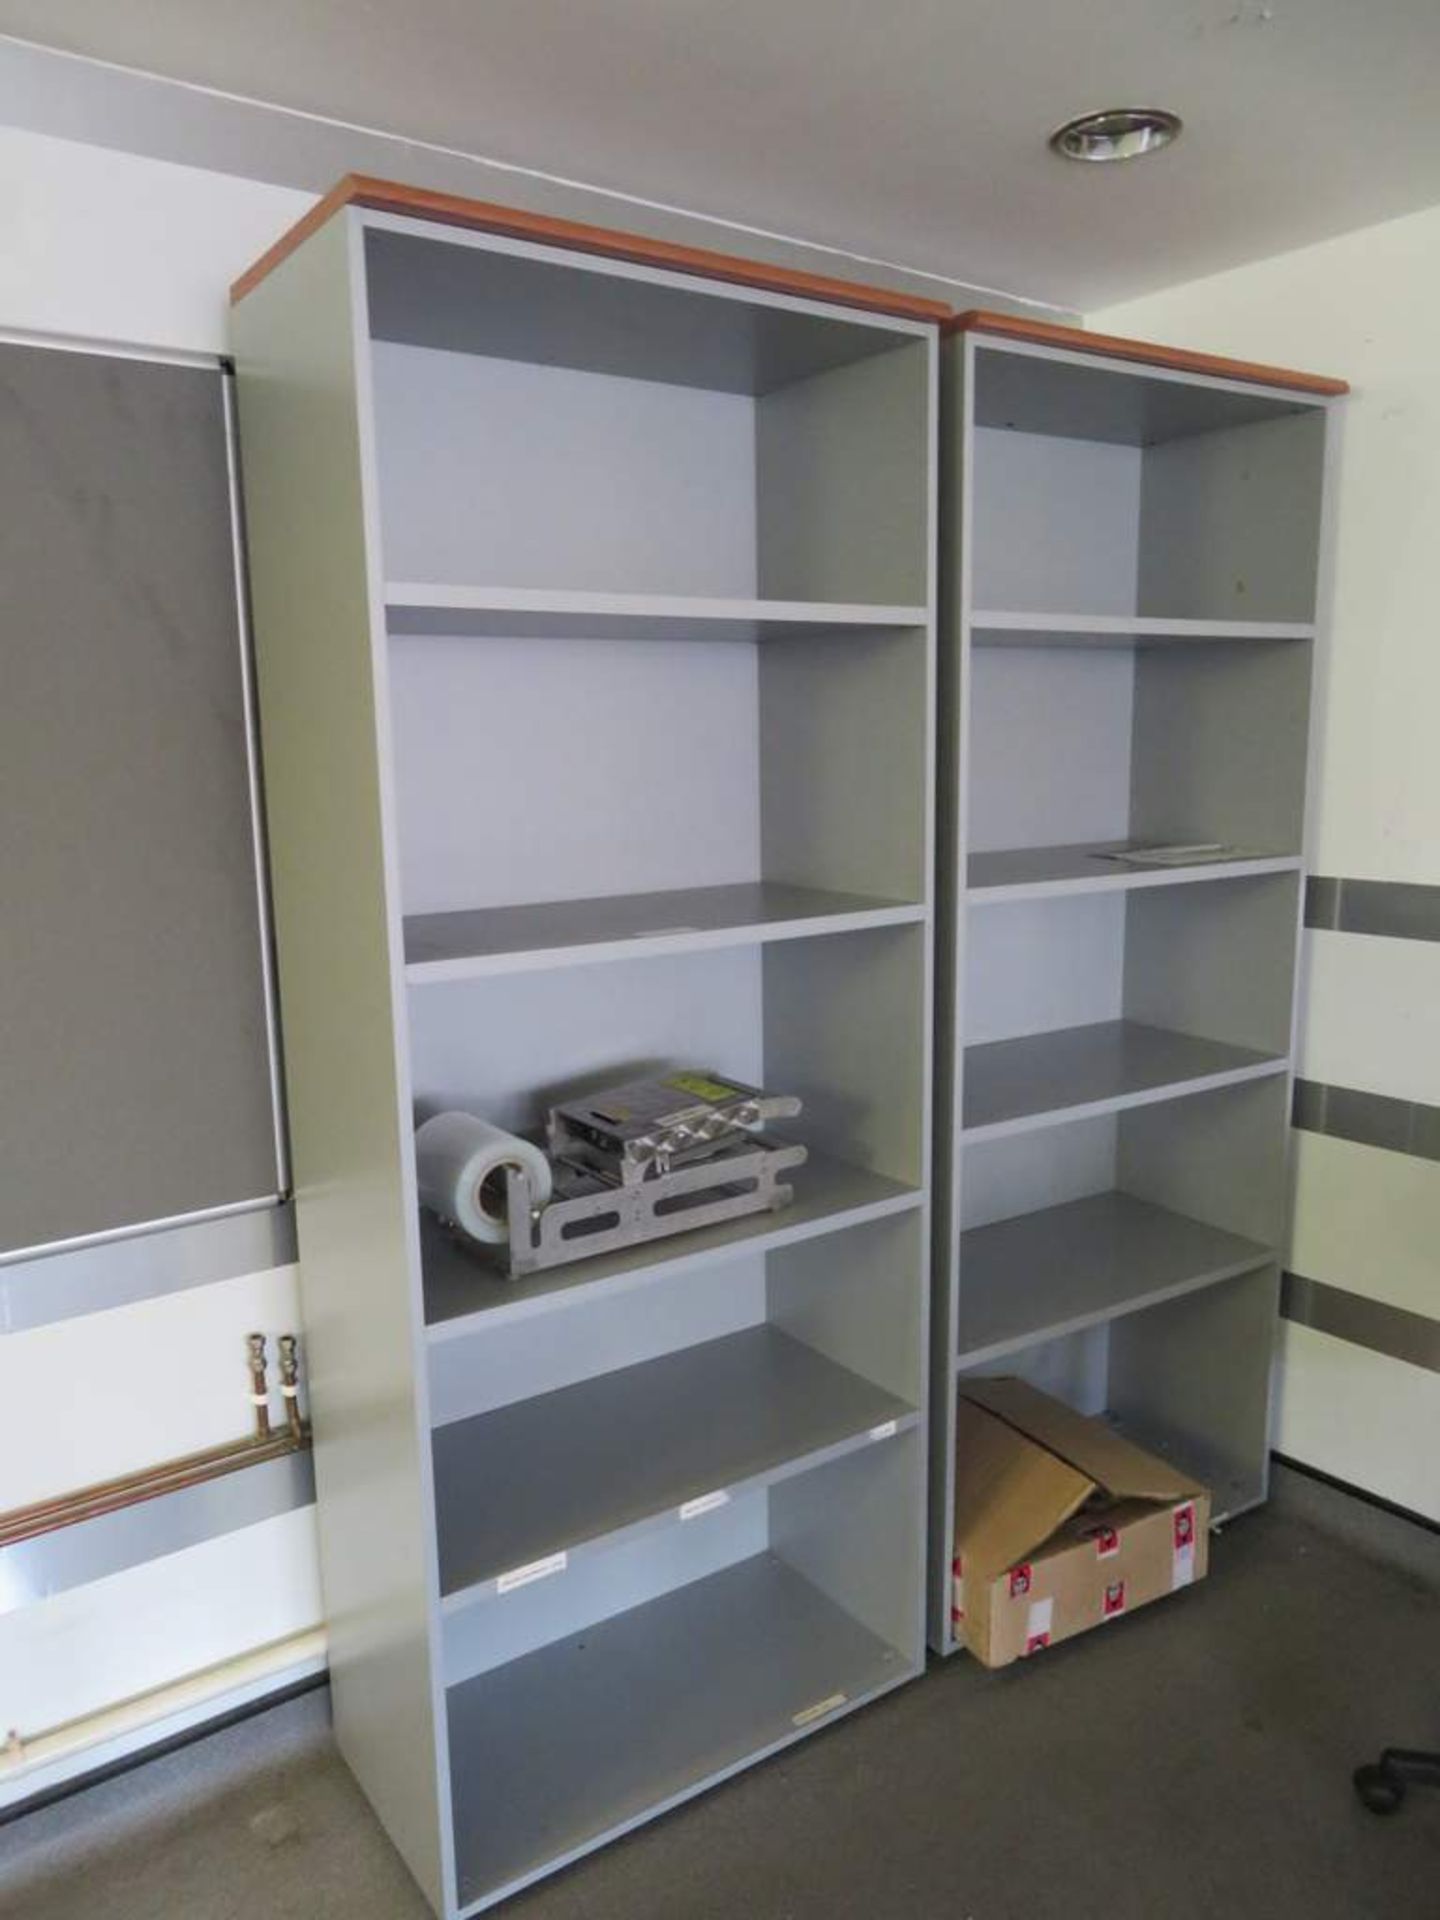 Various items to include: 2 large book shelves, shelf unit, 2 notice boards, first aid kits, etc.